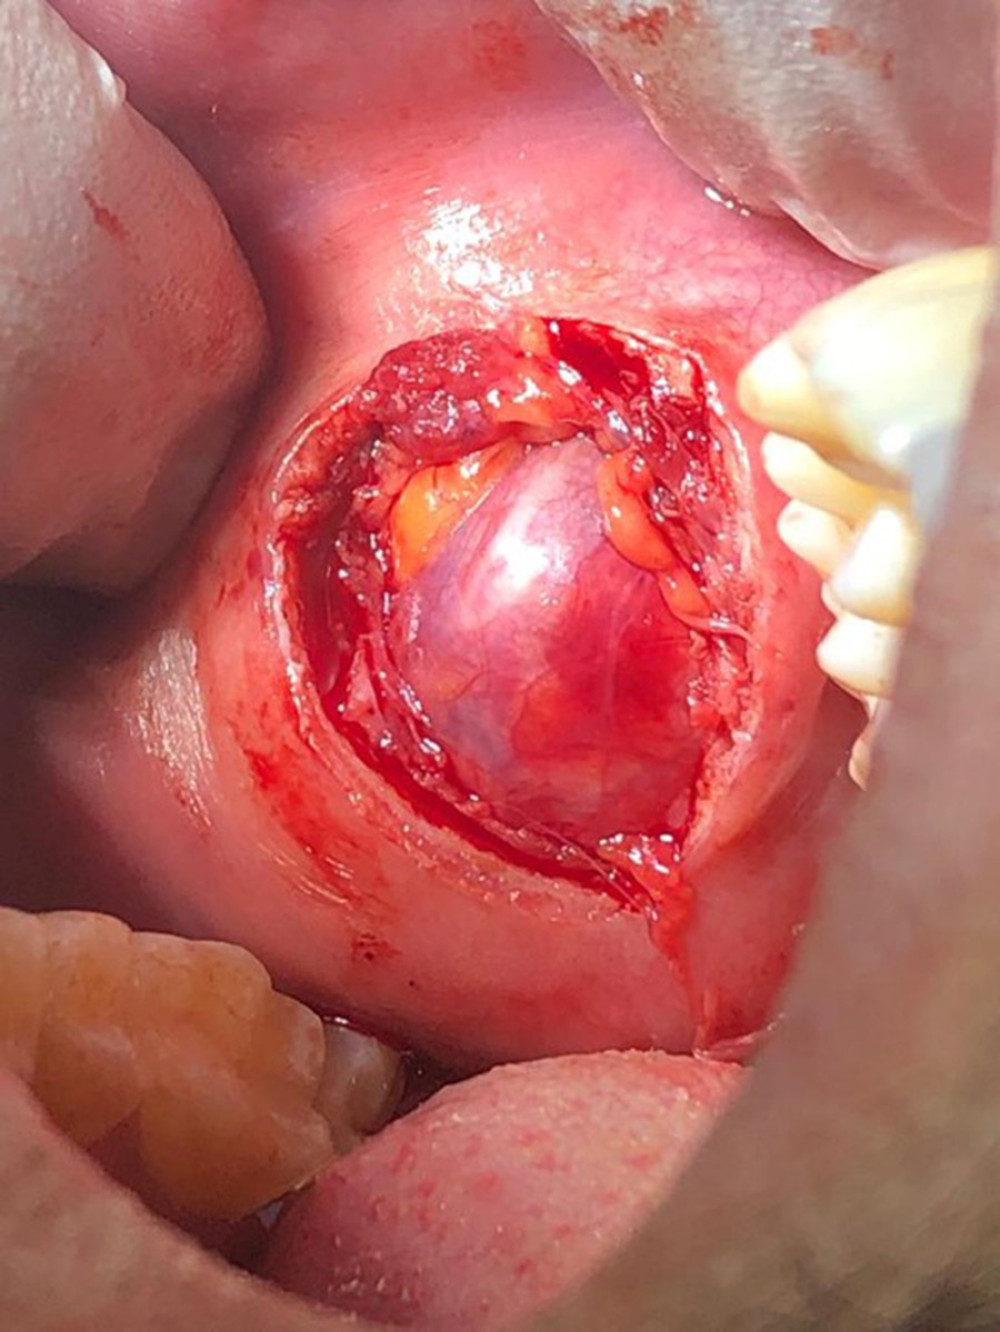 Intraoperative view of the lesion.